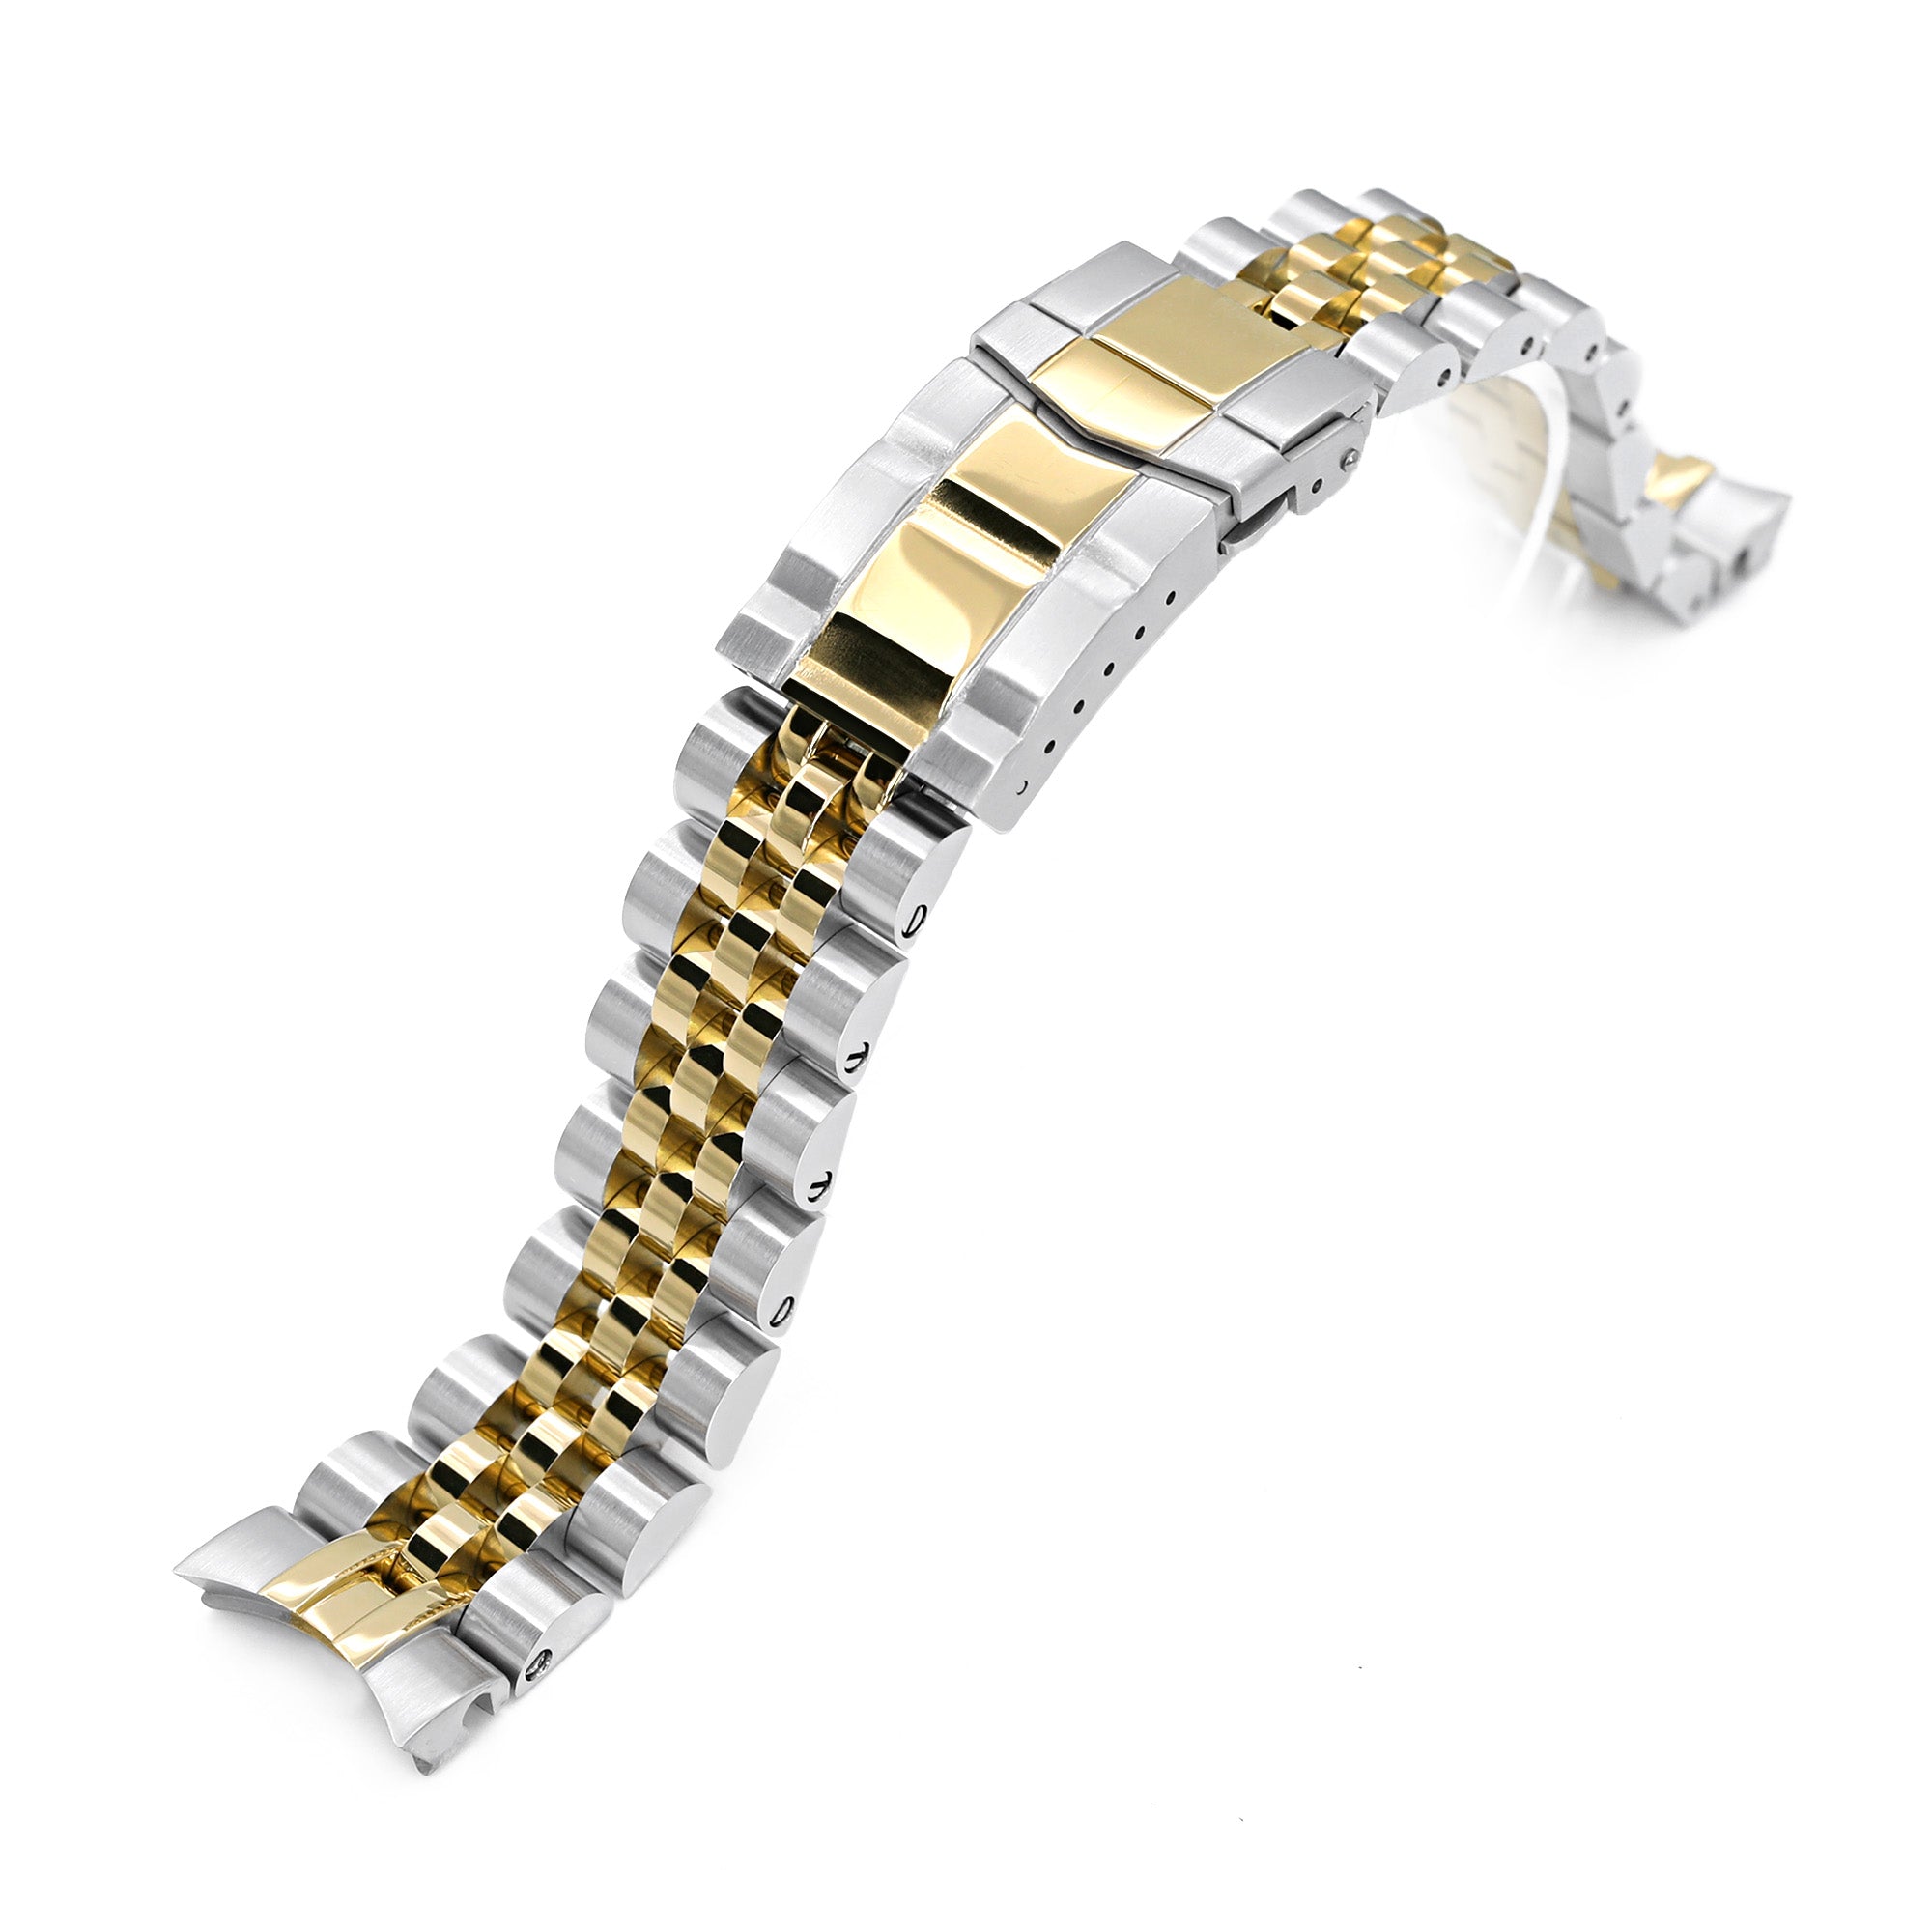 20mm Angus-J Louis JUB Watch Band for Seiko Alpinist SARB017 (or Hamilton K.), Two Tone IP Gold SUB Clasp Strapcode Watch Bands